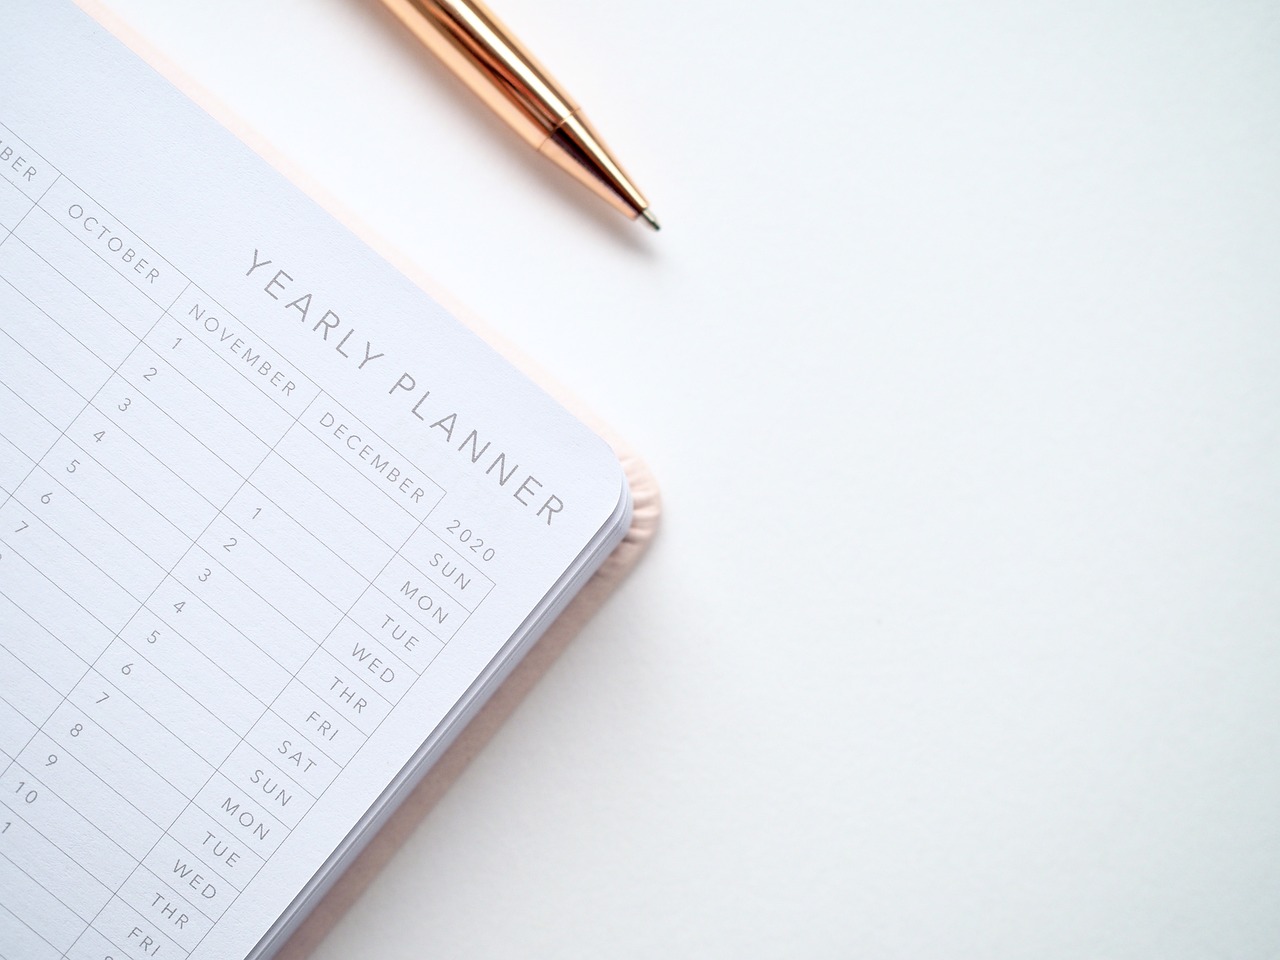 Top view of a digital yearly planner open to a blank monthly calendar page with a rose gold pen resting on top, on a white background.